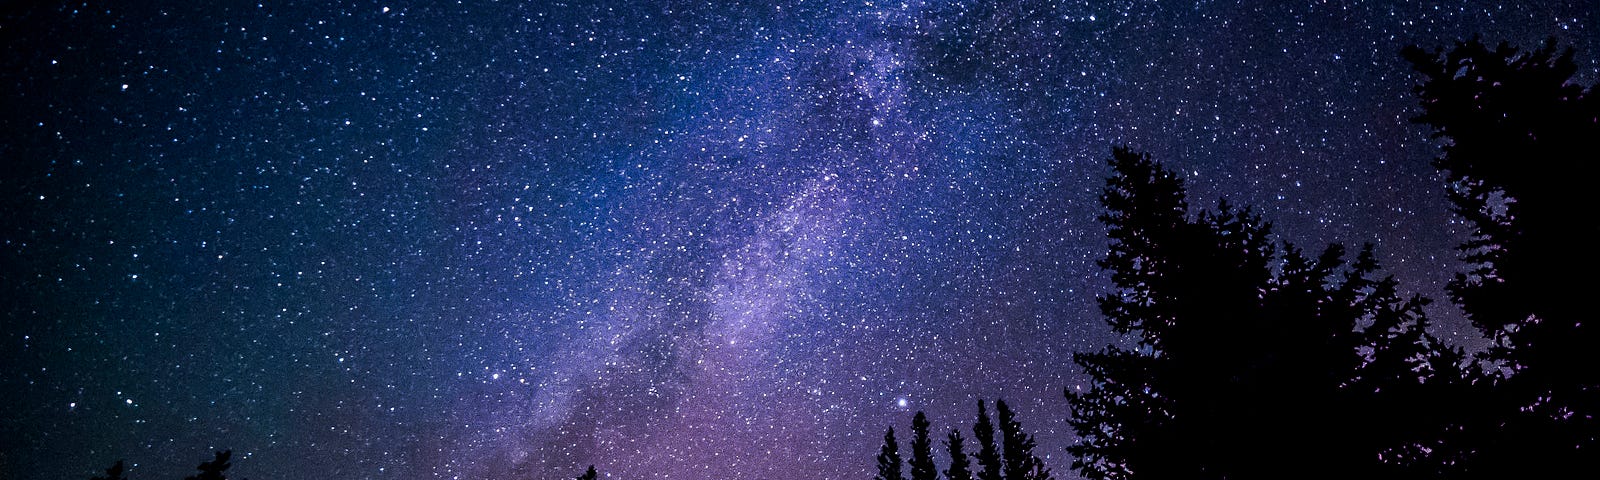 Stars in the Milky Way populate a blue/black sky, with evergreen trees at the bottom of the image.